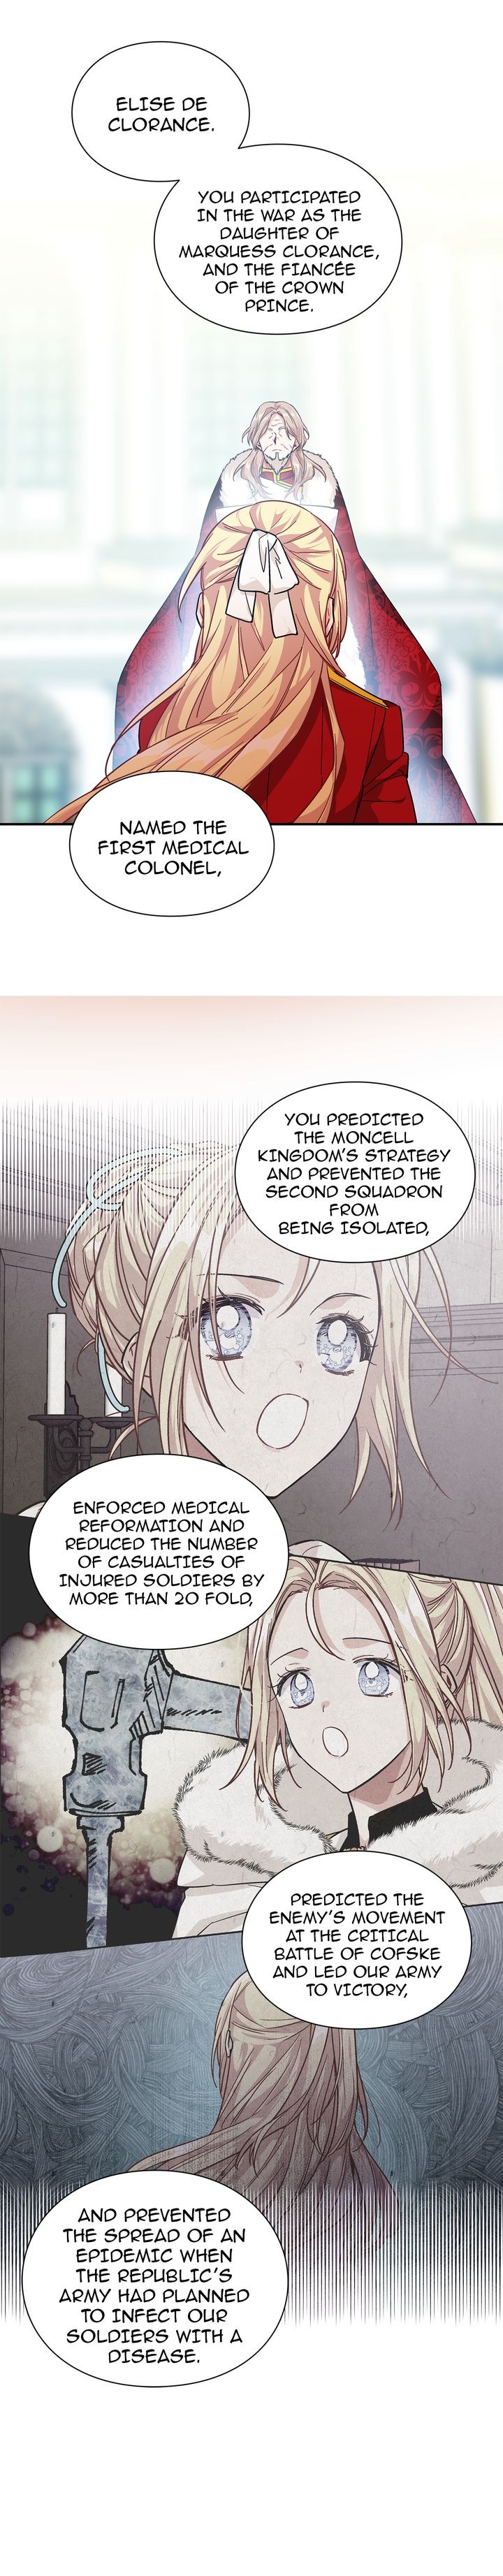 Doctor Elise - The Royal Lady with the Lamp - Chapter 101 Page 19